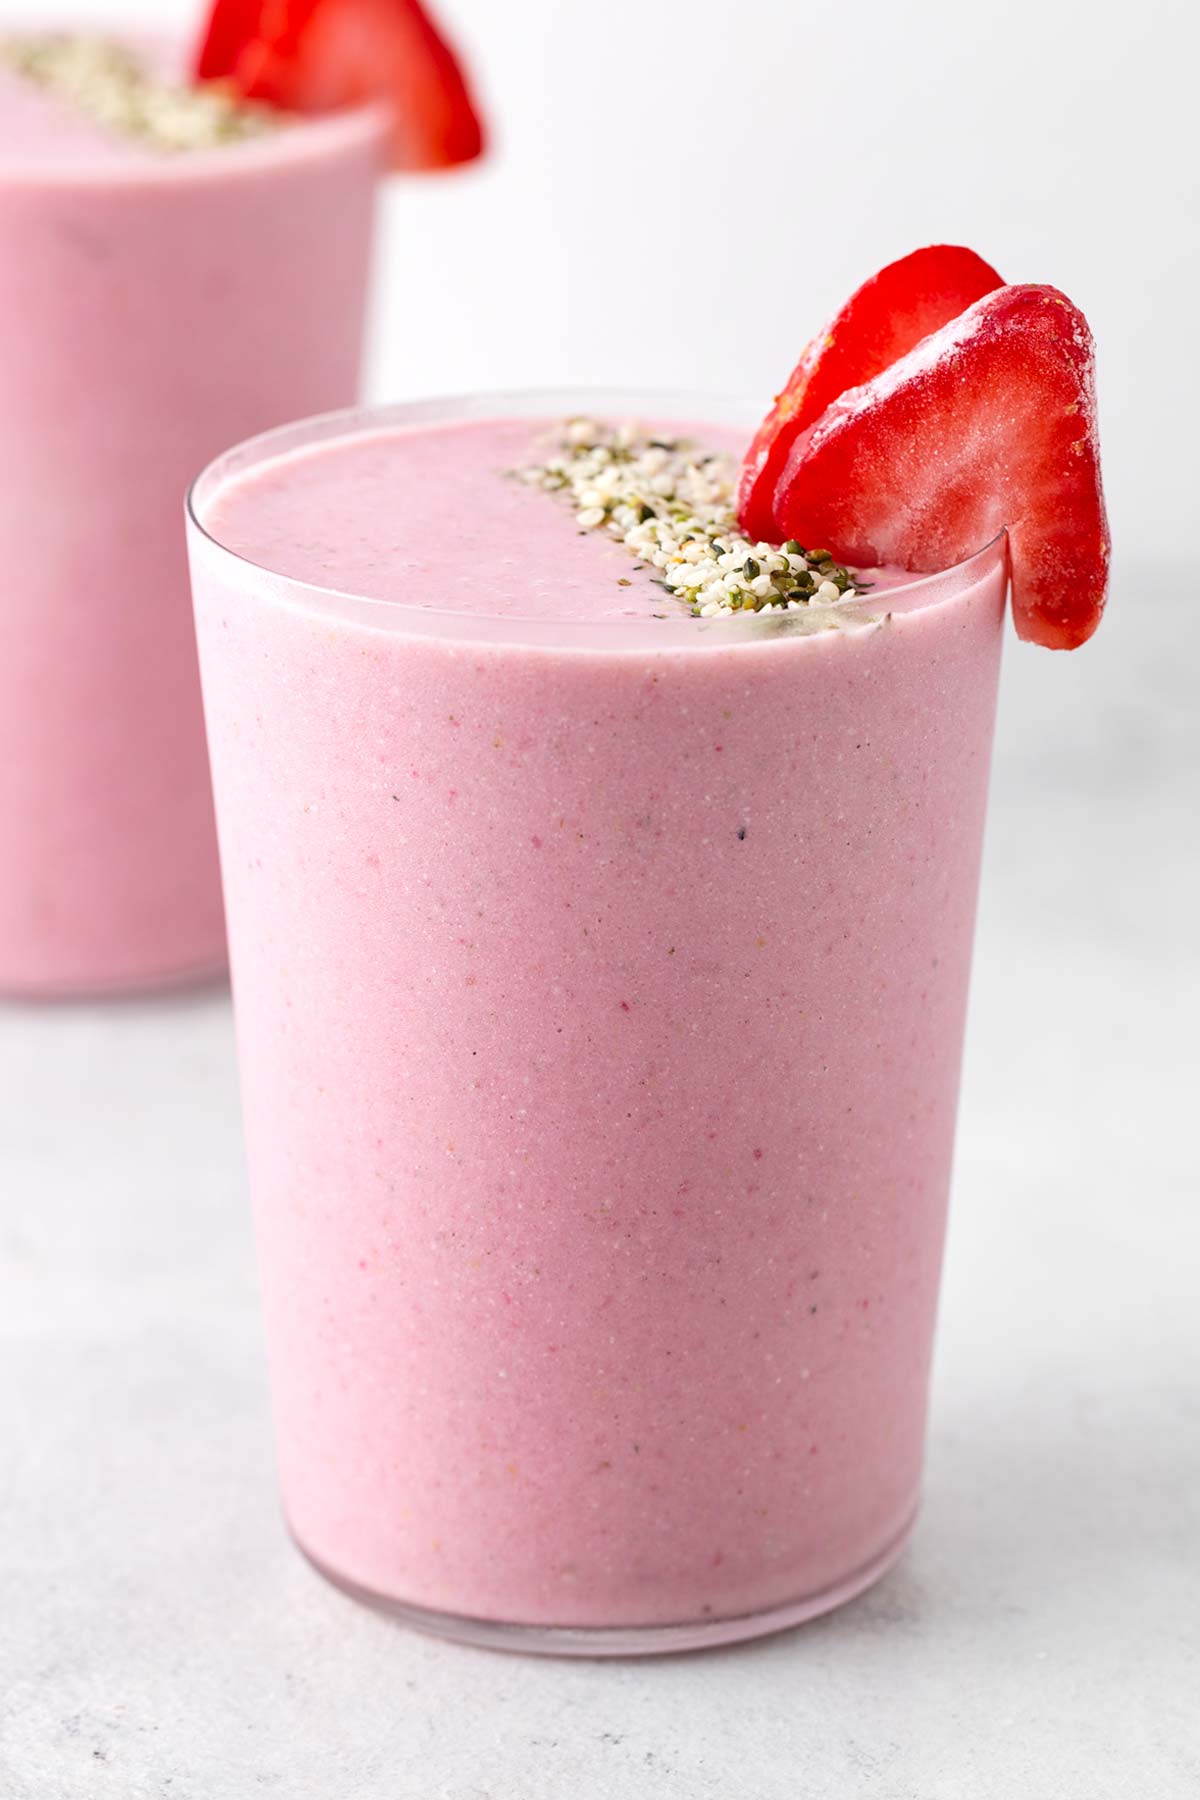 Strawberry protein smoothie in a glass.